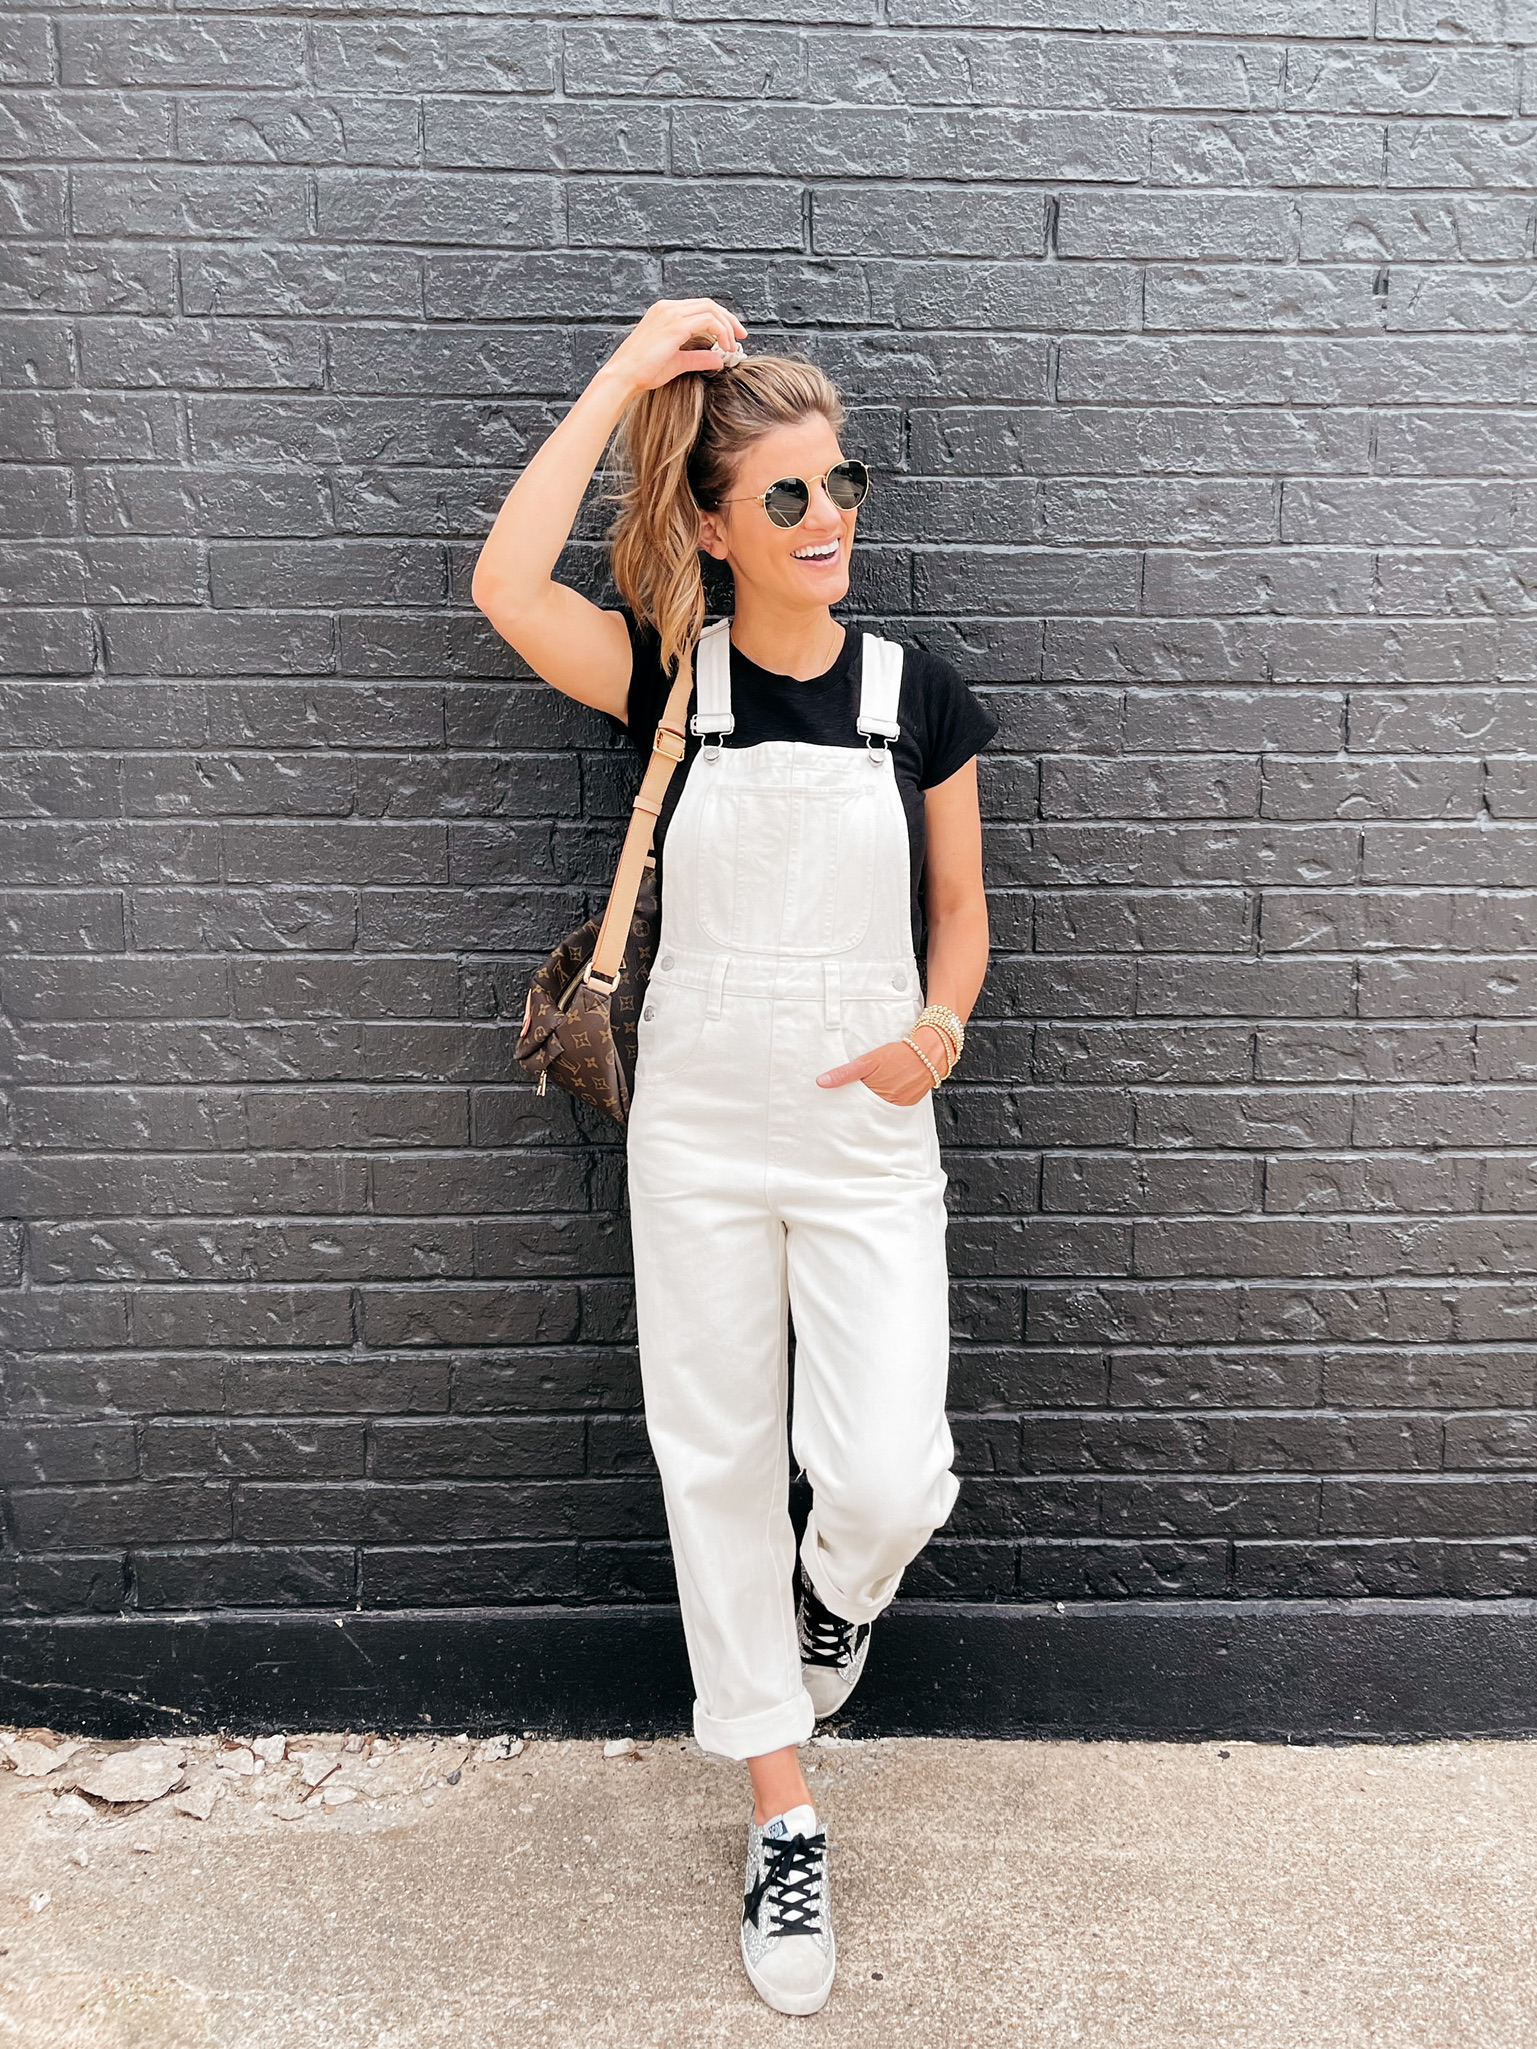 Brighton Butler wearing white overalls and black tee from madewell